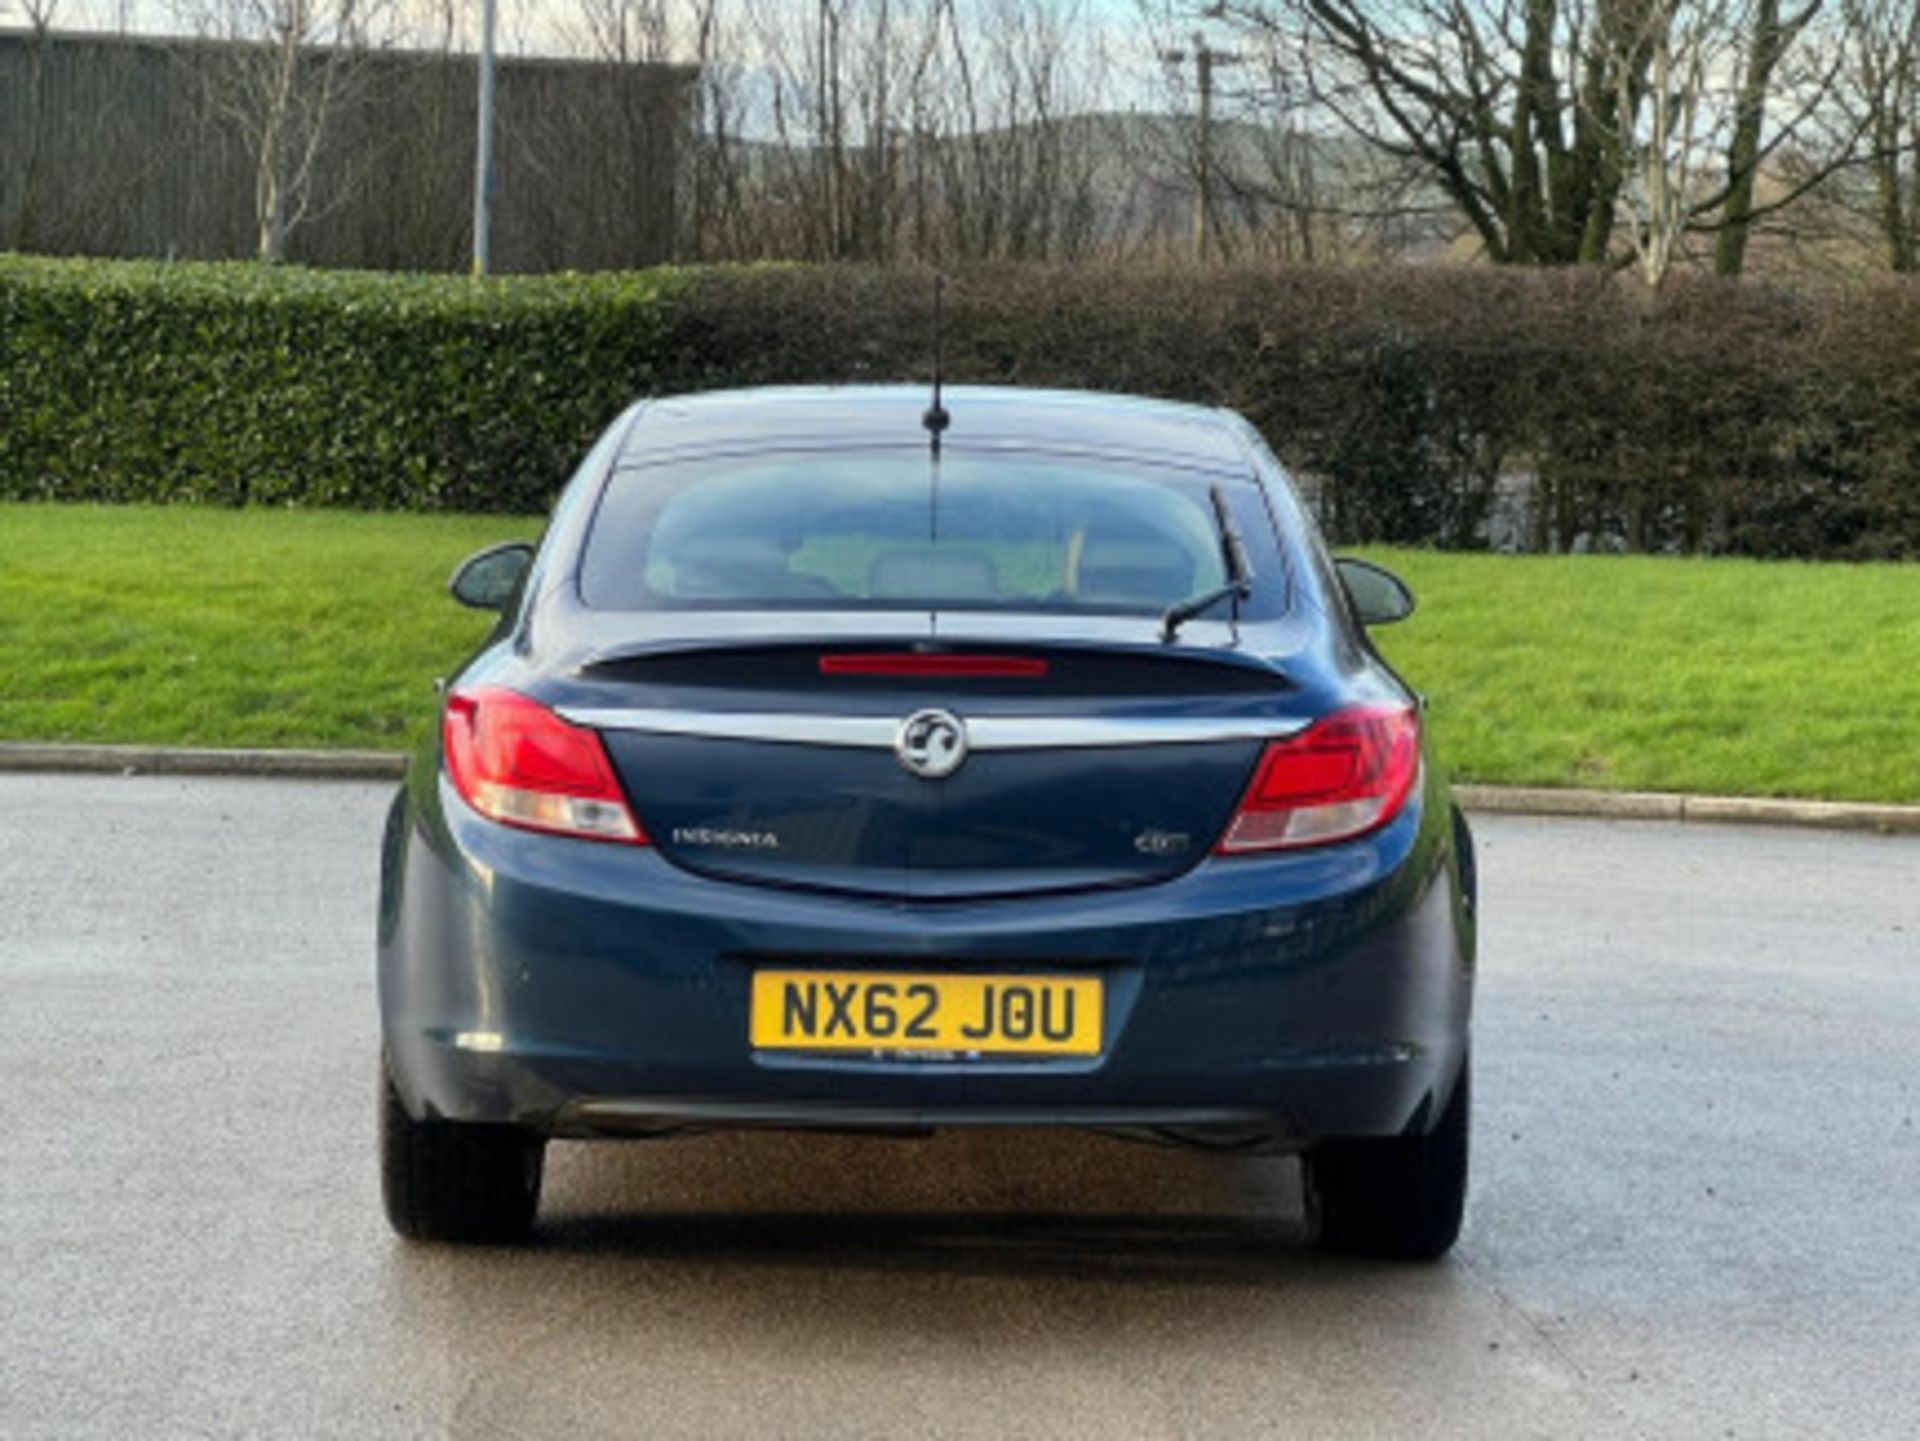 2012 VAUXHALL INSIGNIA 2.0 CDTI ELITE AUTO EURO 5 - DISCOVER EXCELLENCE >>--NO VAT ON HAMMER--<< - Image 53 of 120